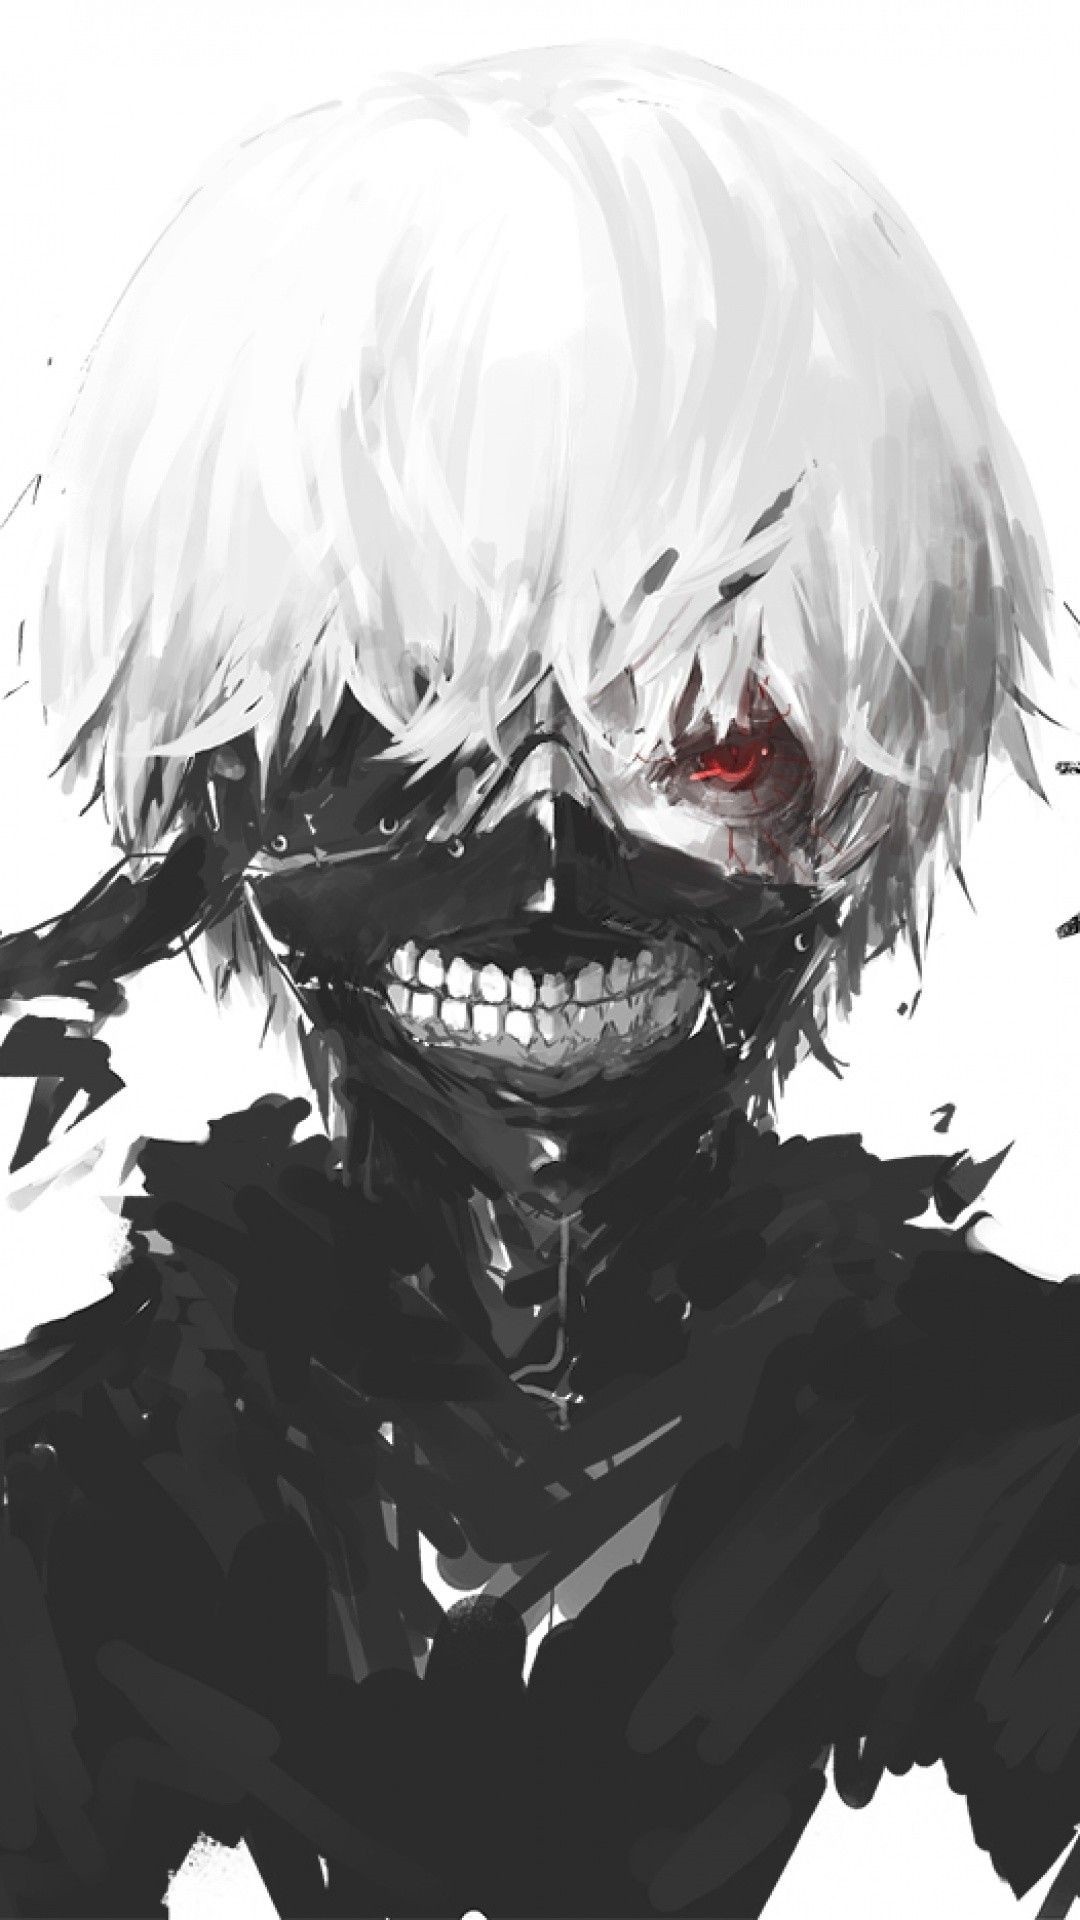 Tokyo Ghoul wallpaper for iPhone